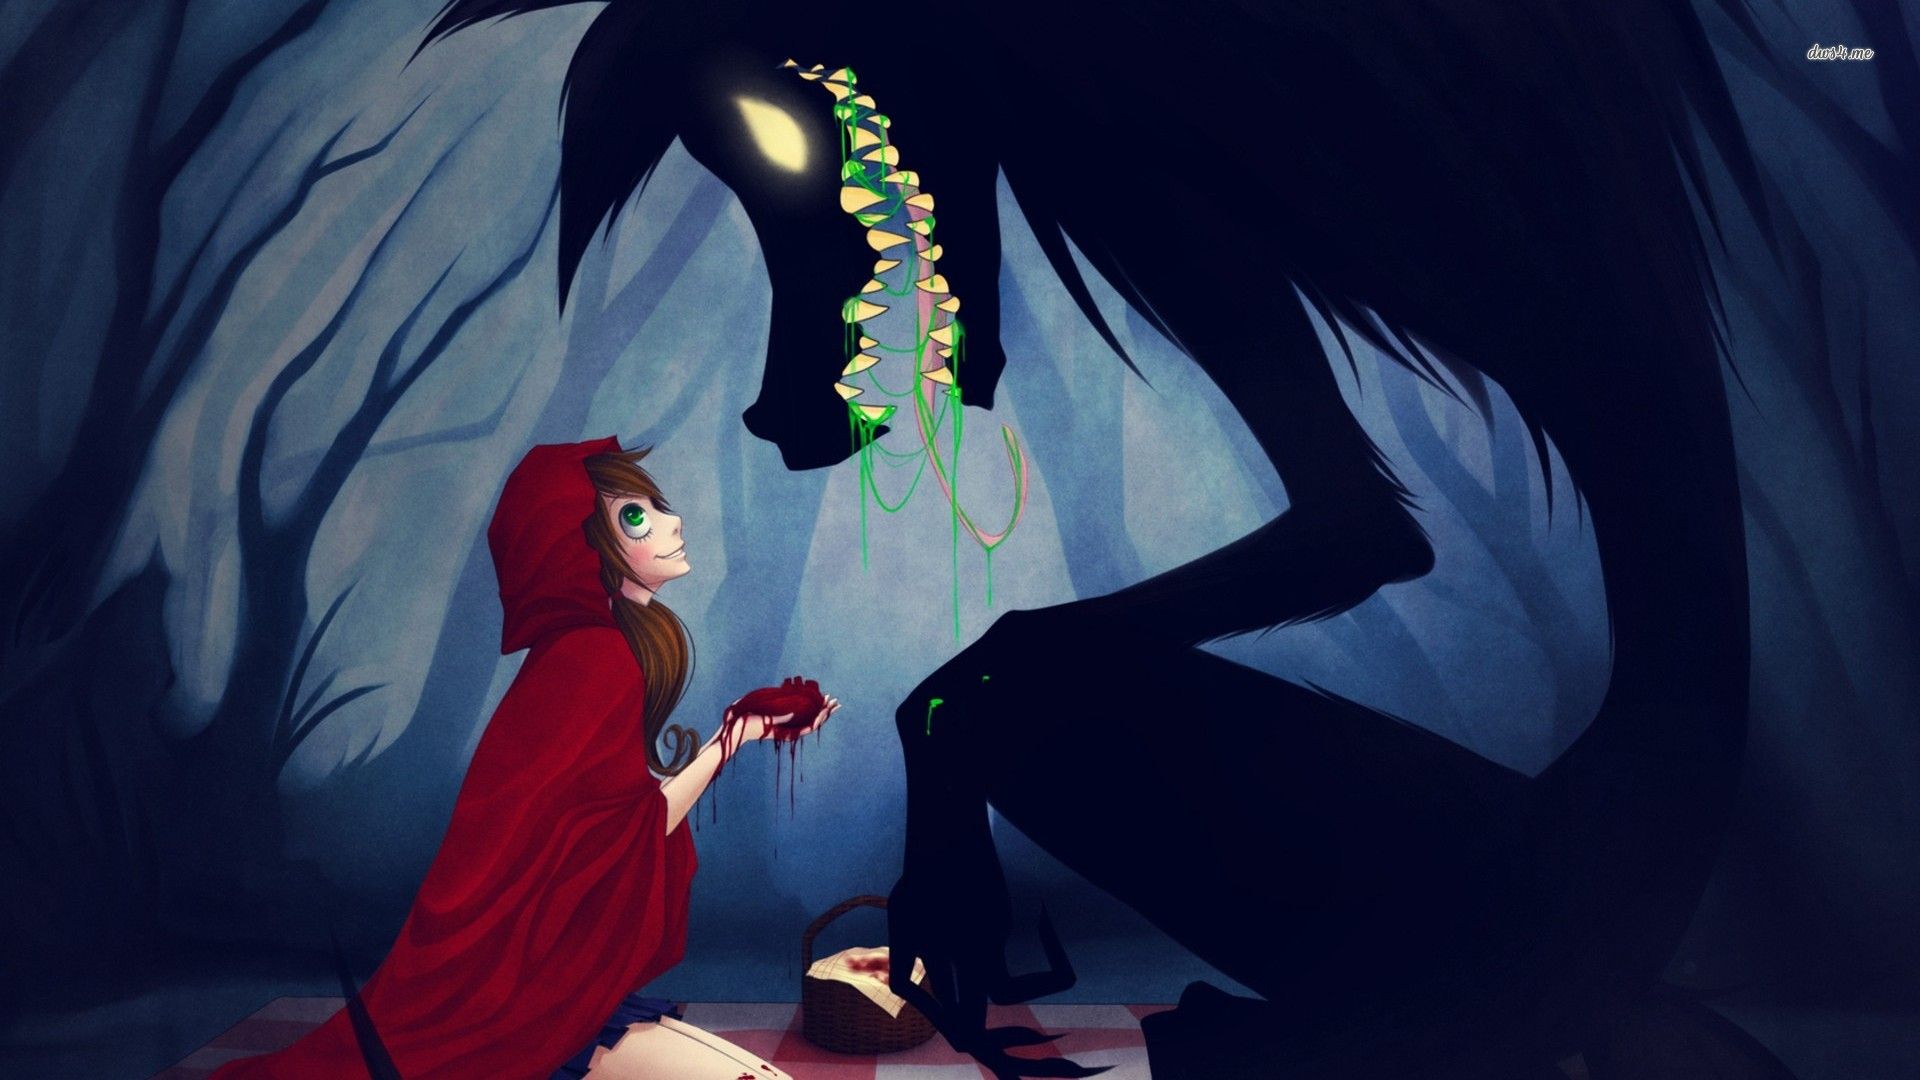 Creepy Red Riding Hood and the wolf HD wallpaper. Red riding hood